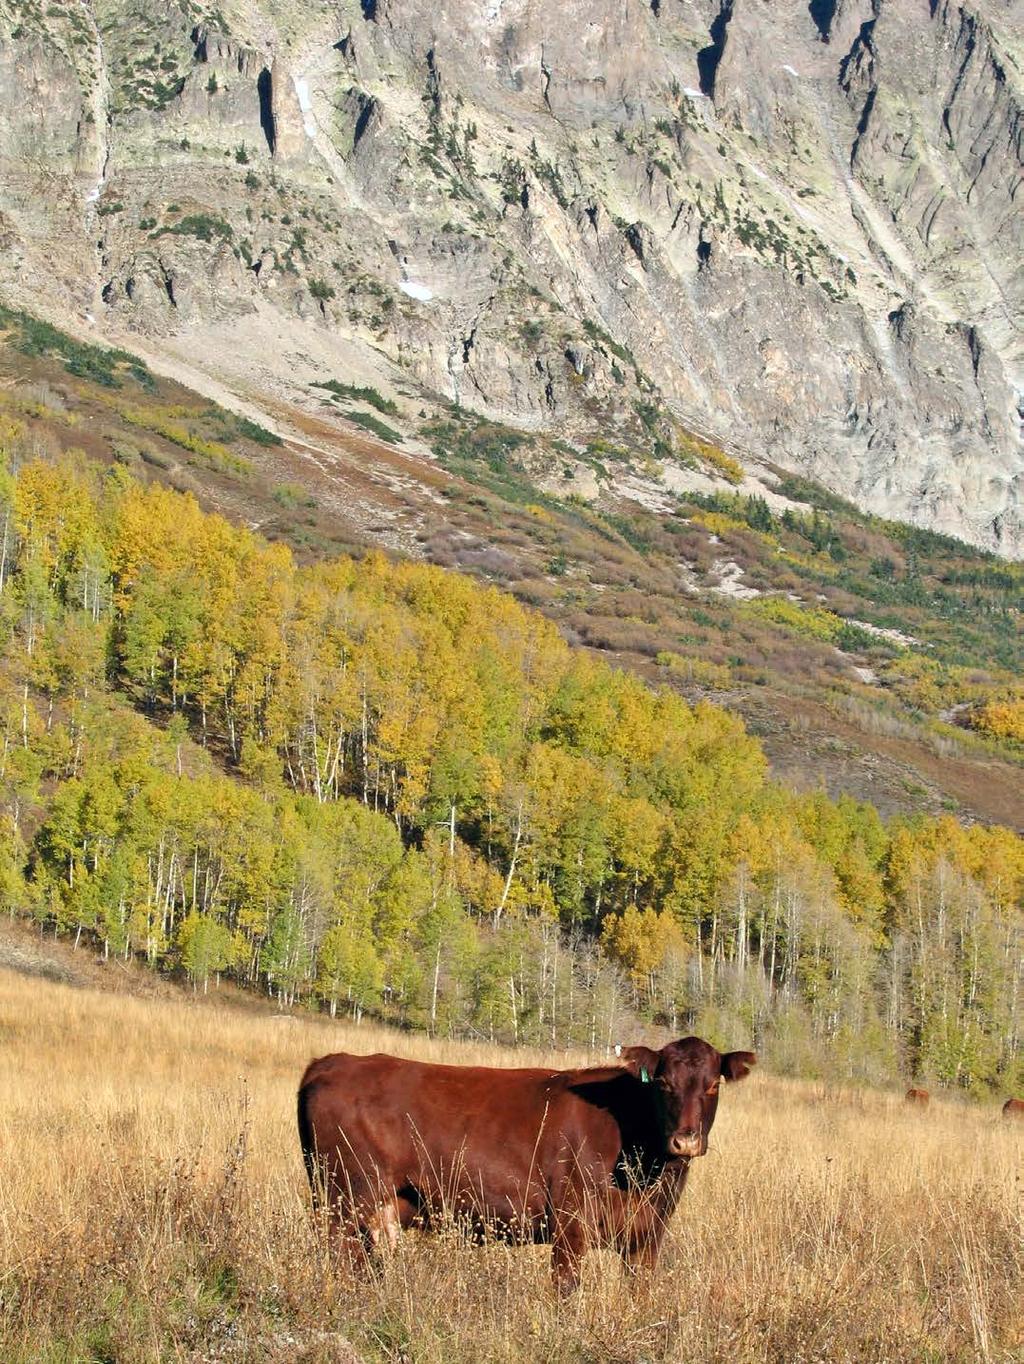 3-Step Body Condition Scoring (BCS) Guide FOR RANGE CATTLE Implications for Grazing and